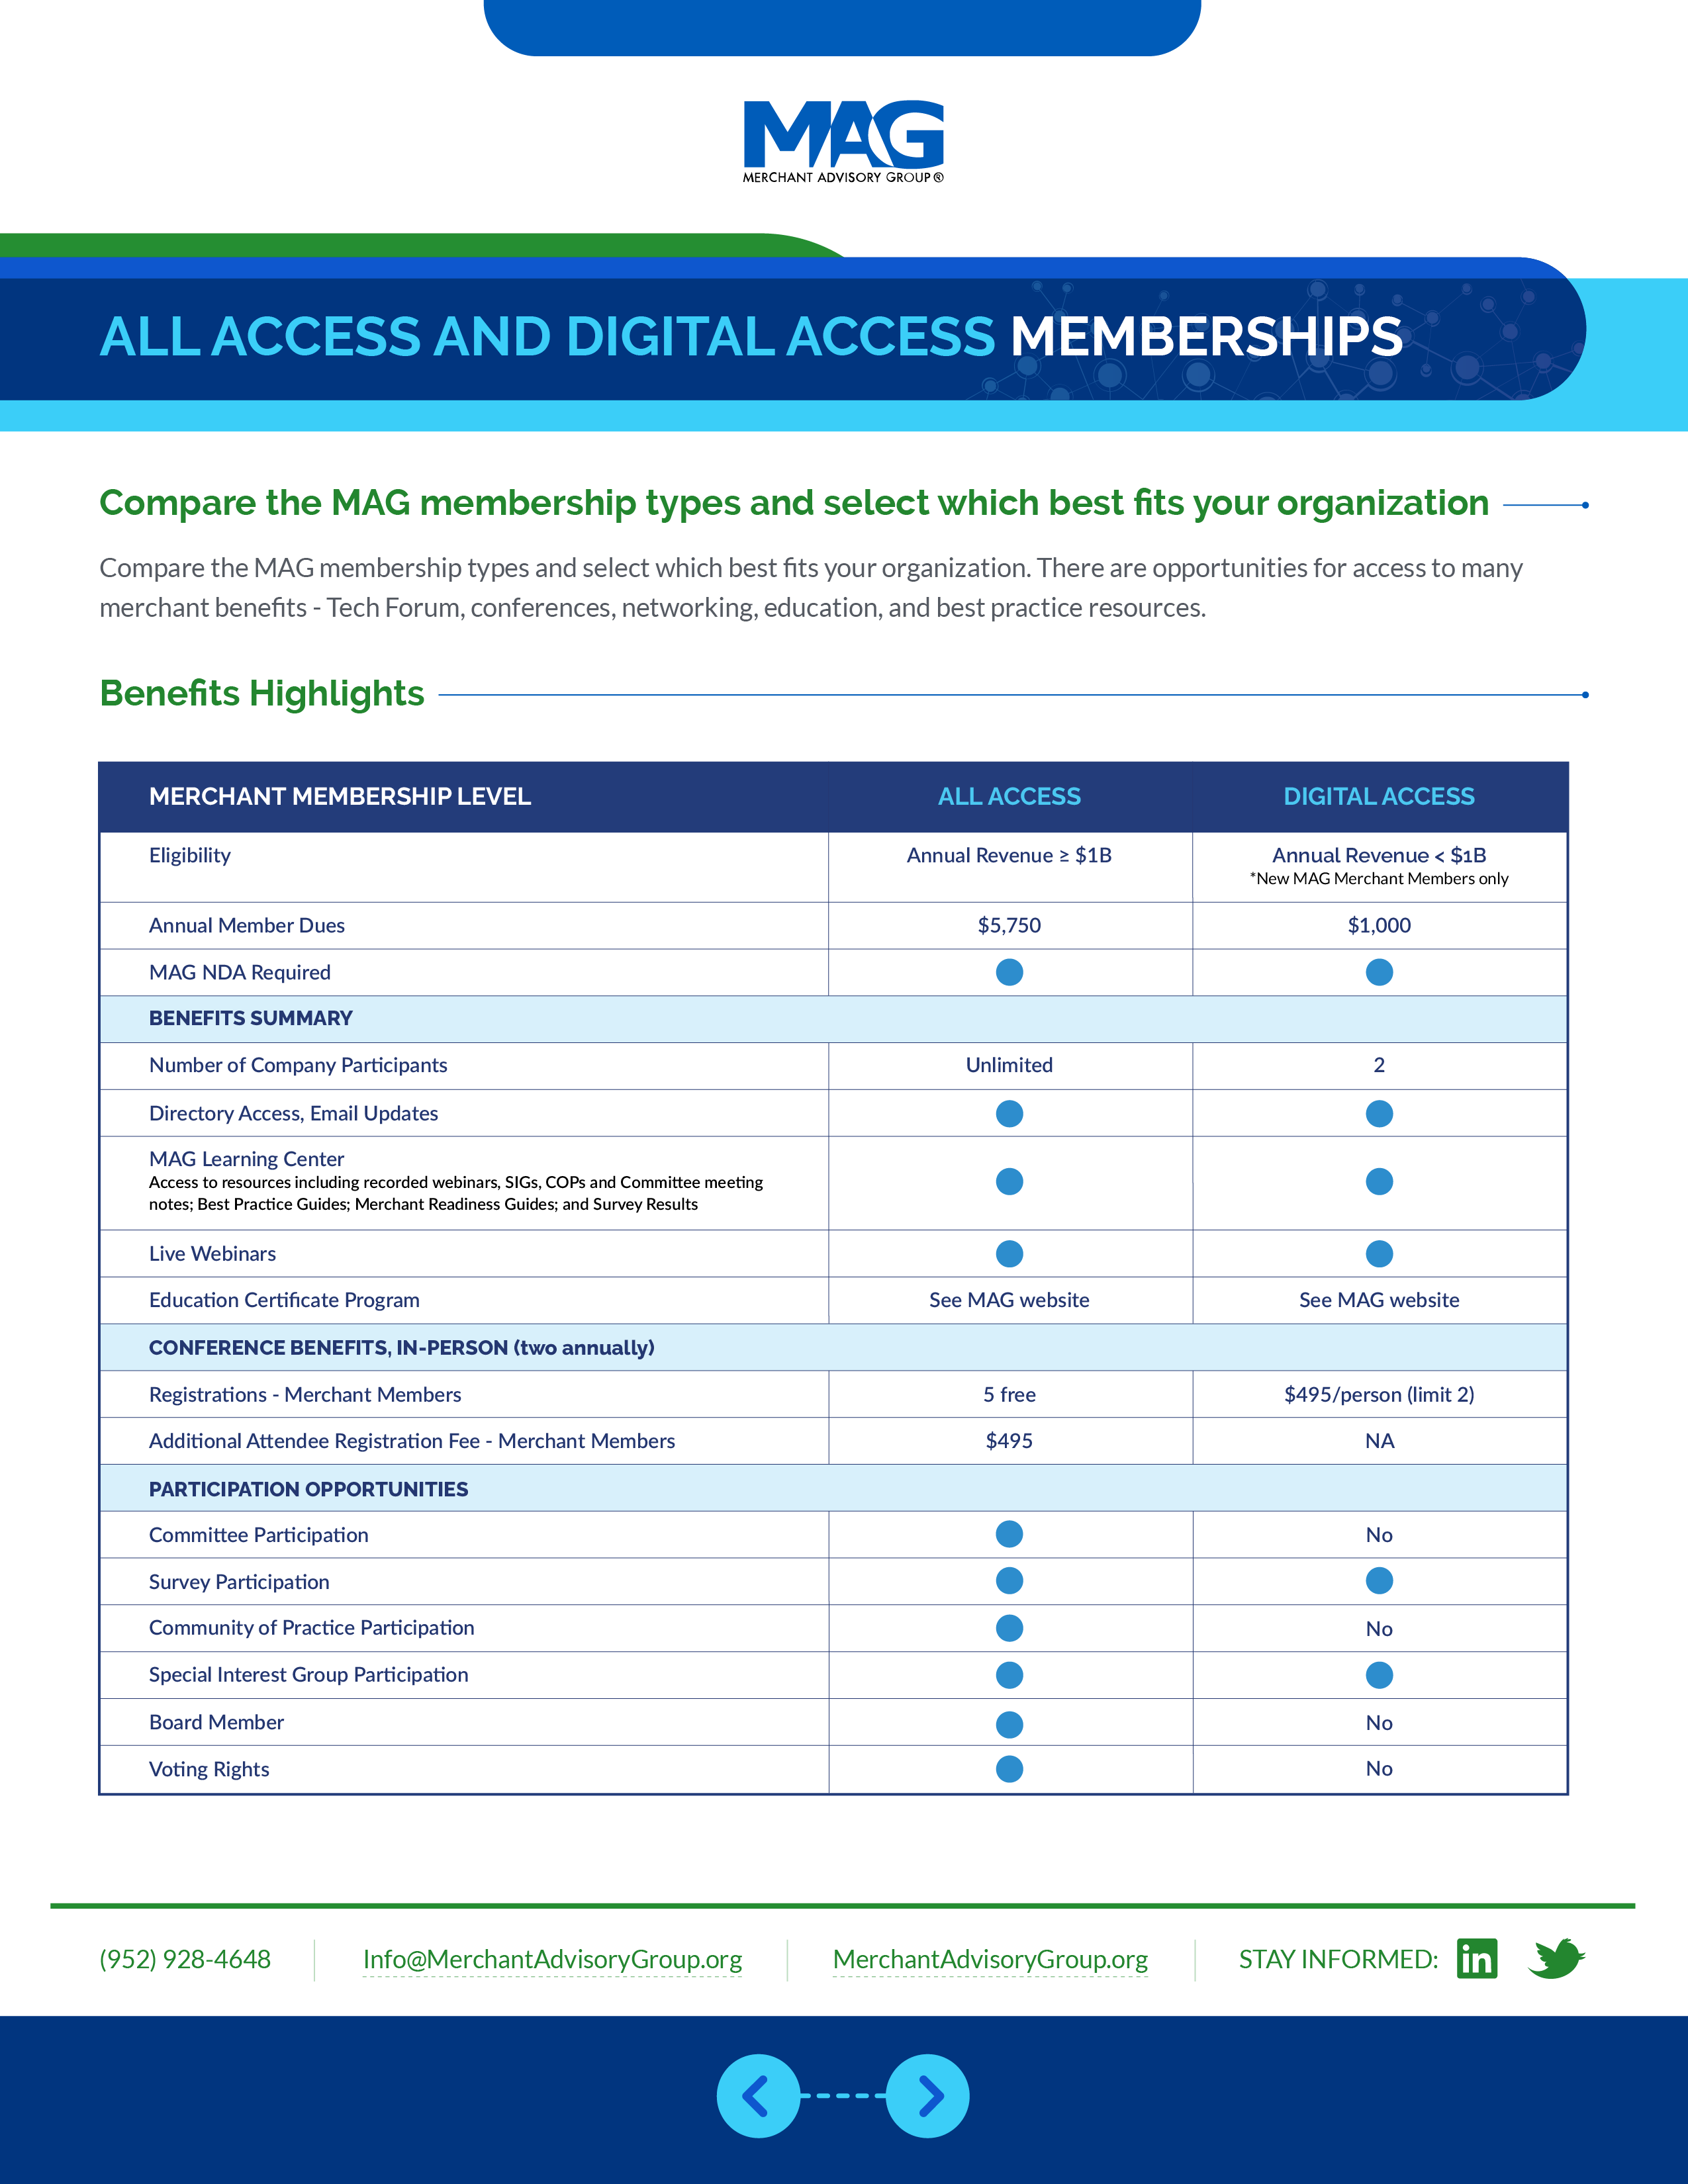 All Access and Digital Access Membership Benefits comparison chart